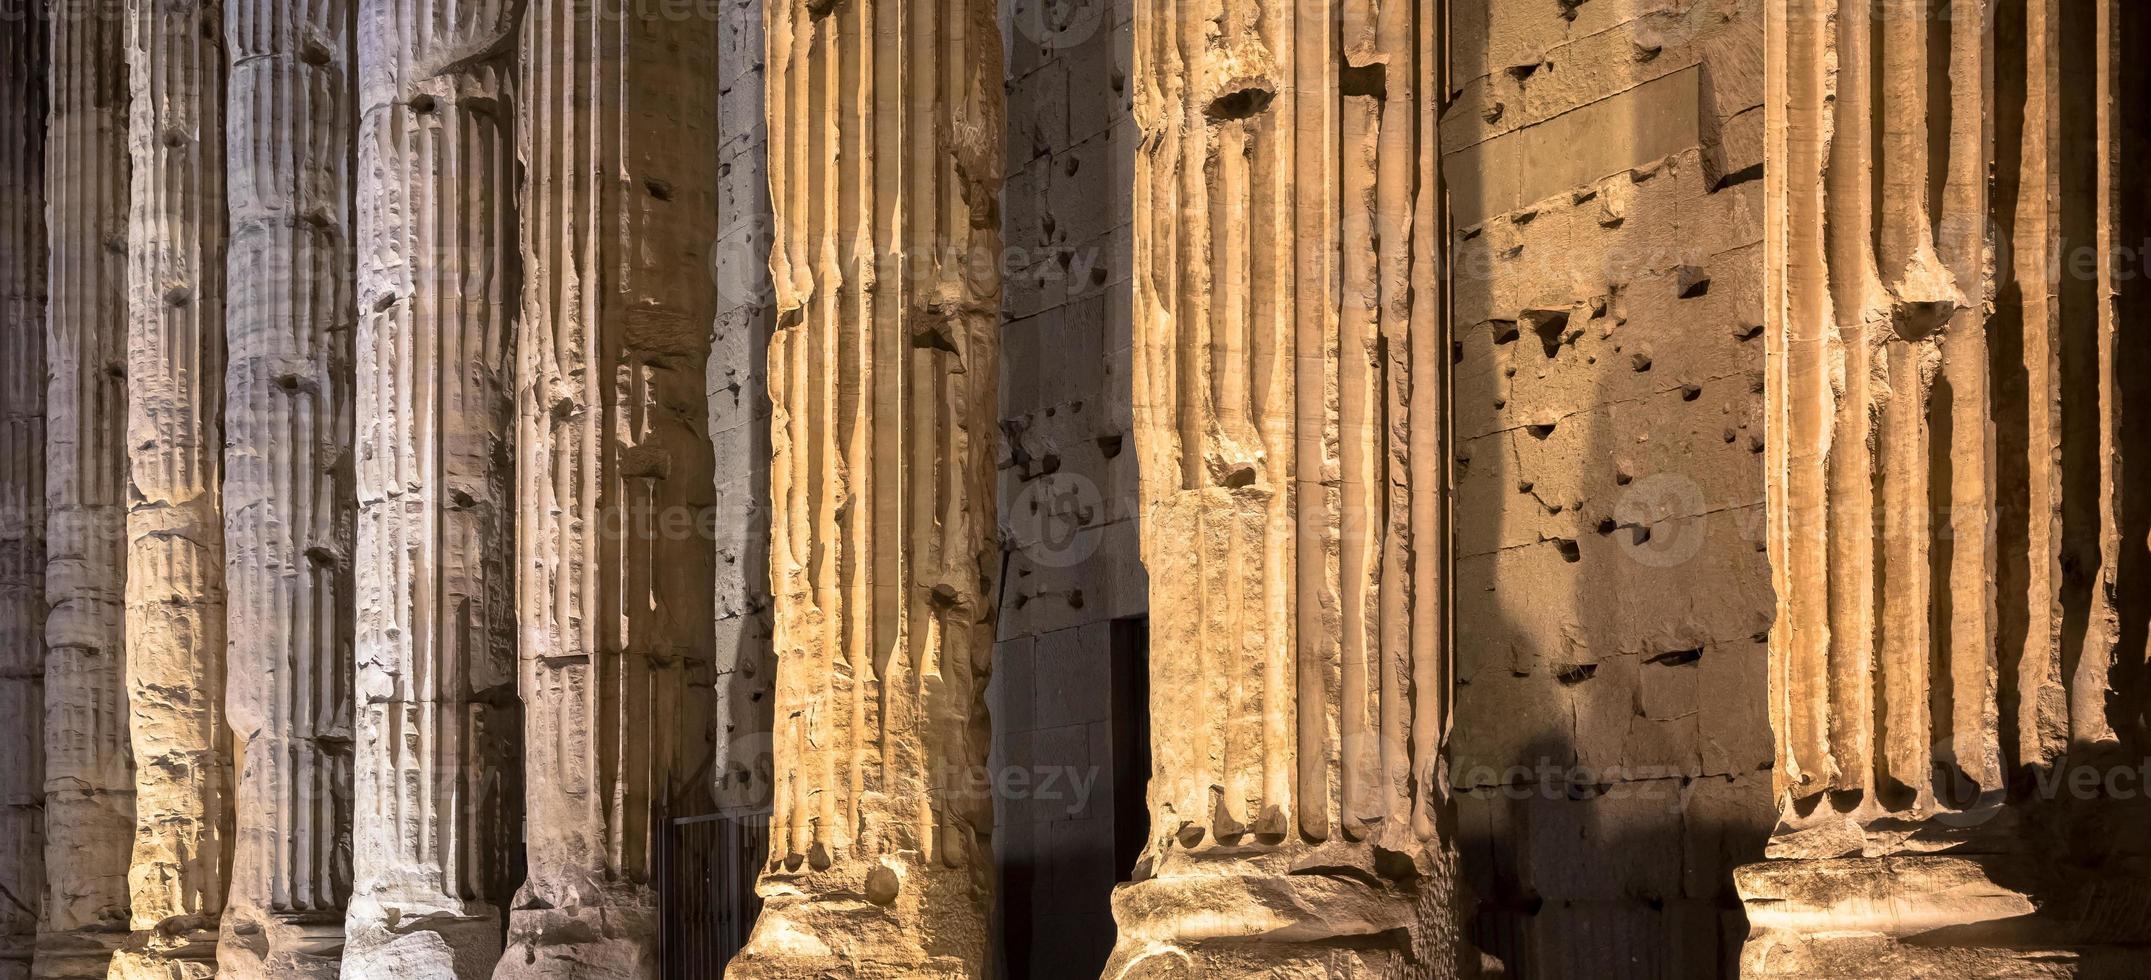 Detail of illuminated column architecture of Pantheon by night, Rome - Italy photo